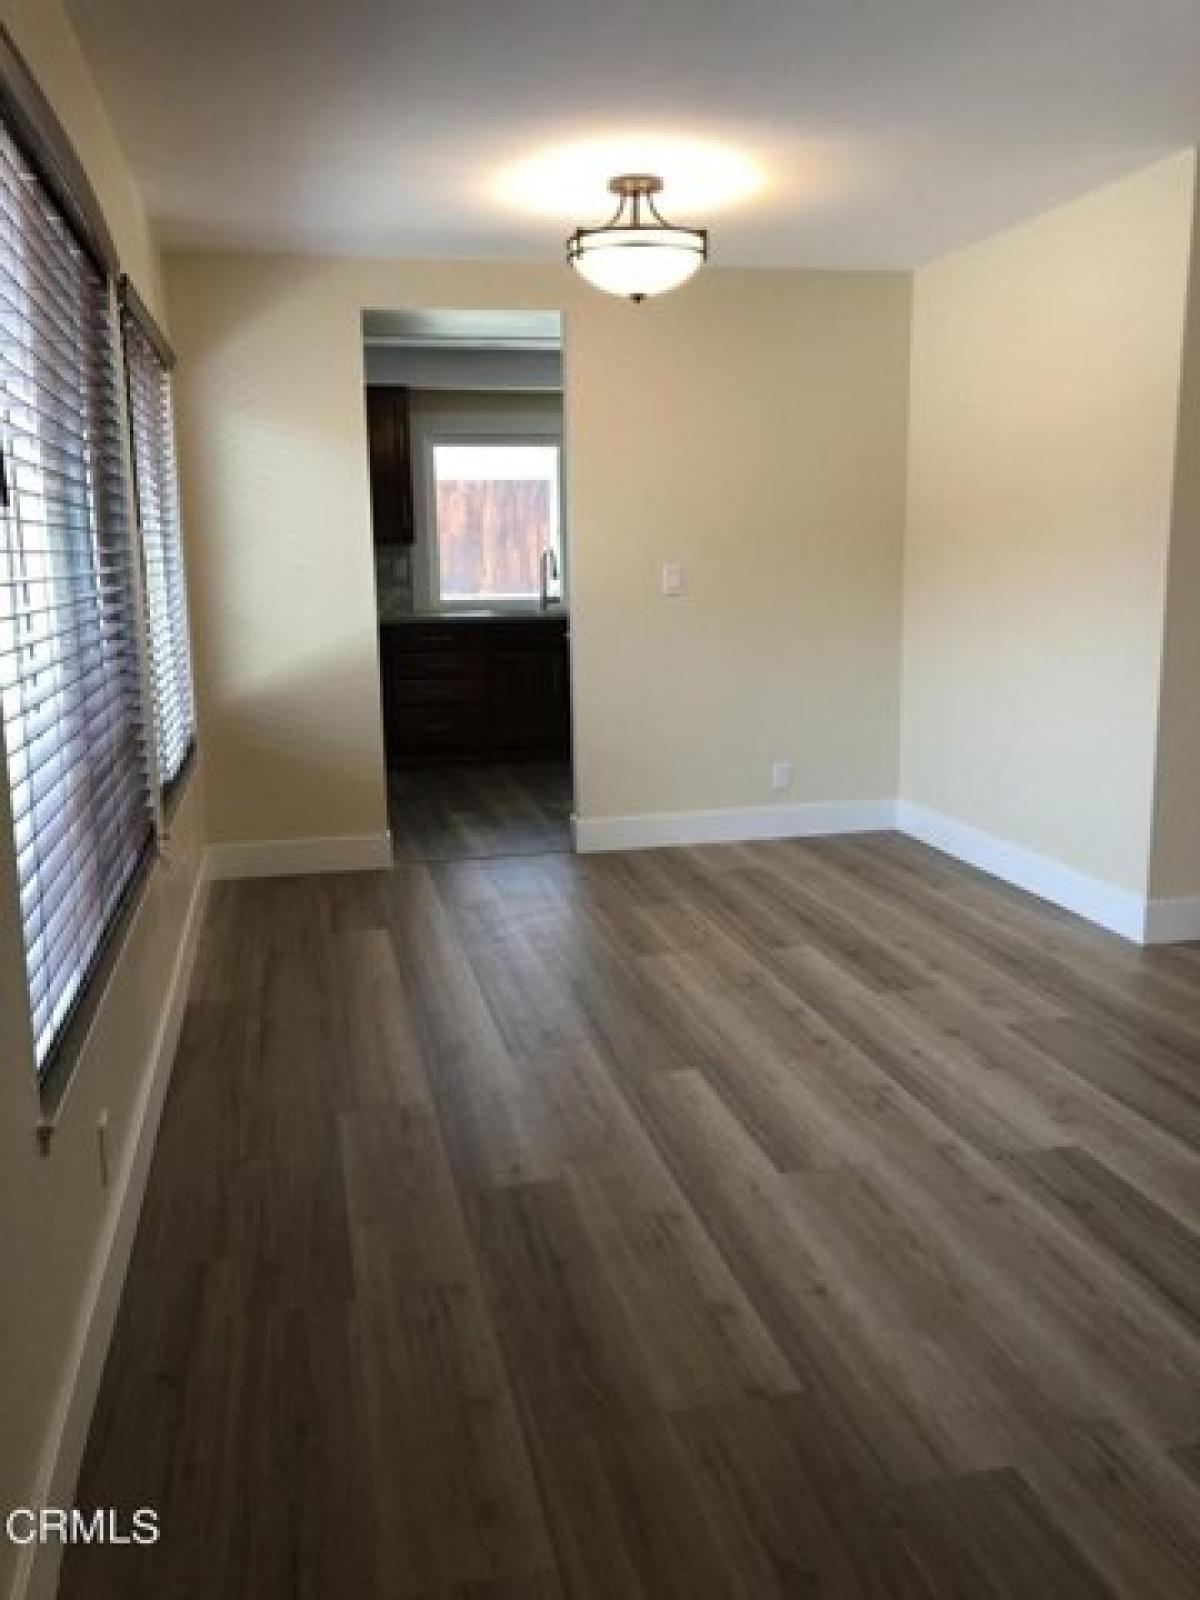 Picture of Home For Rent in Ventura, California, United States